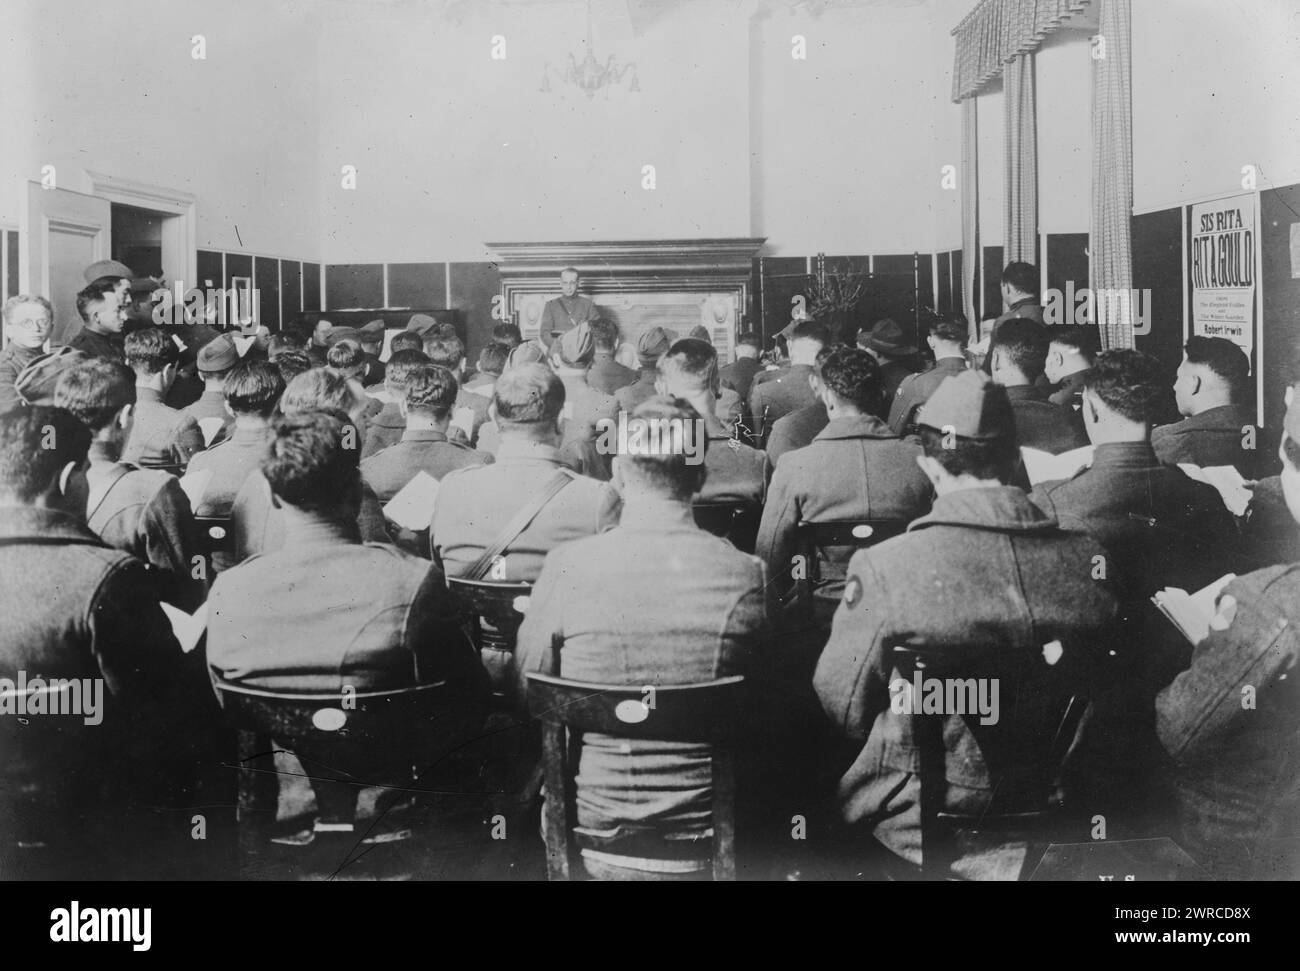 Service at Jewish Welfare Room, Coblenz, Photograph shows a service in Koblenz, Germany sponsored by the National Jewish Welfare Board, an organization established during World War I to support American Jewish soldiers., between 1918 and ca. 1920, Glass negatives, 1 negative: glass Stock Photo